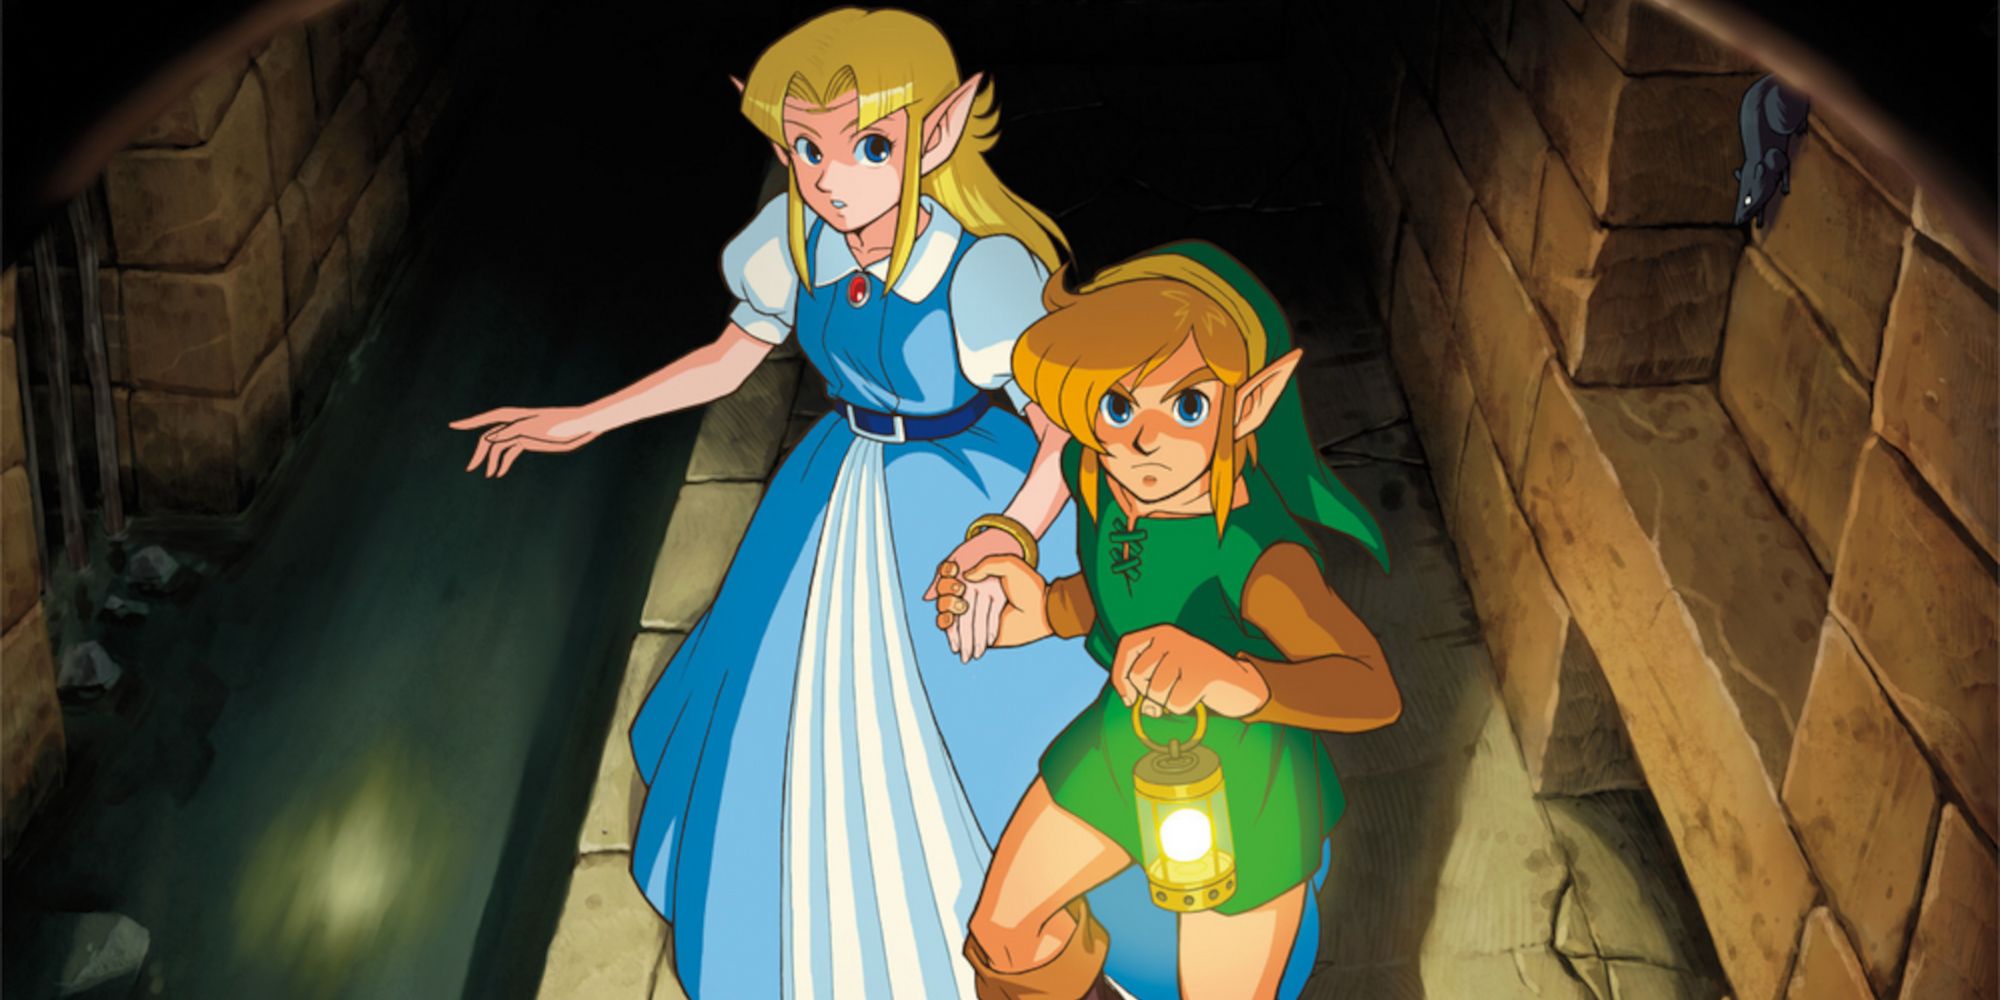 Link and Zelda travelling through the sewers in link to the past